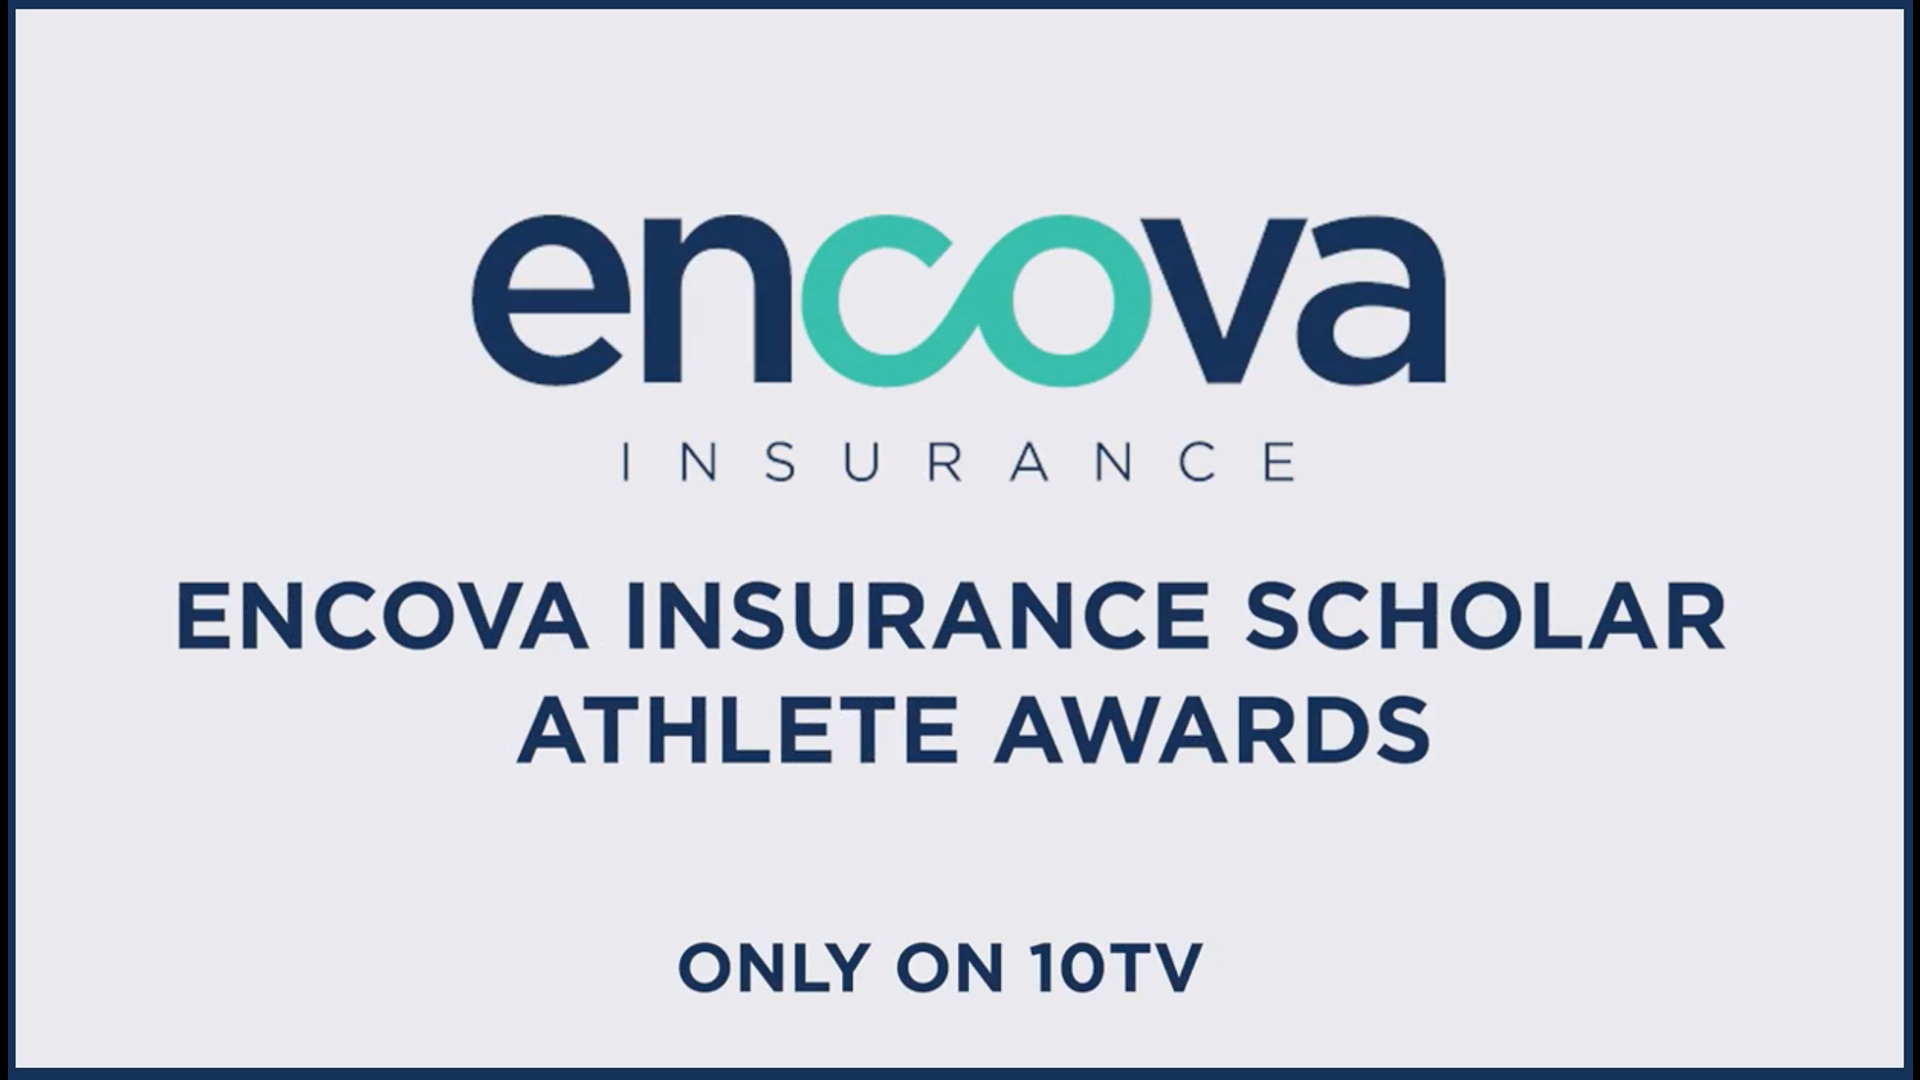 Houk and Search each received a $7,000 scholarship from Encova Insurance based on their community involvement, academic and athletic achievements.